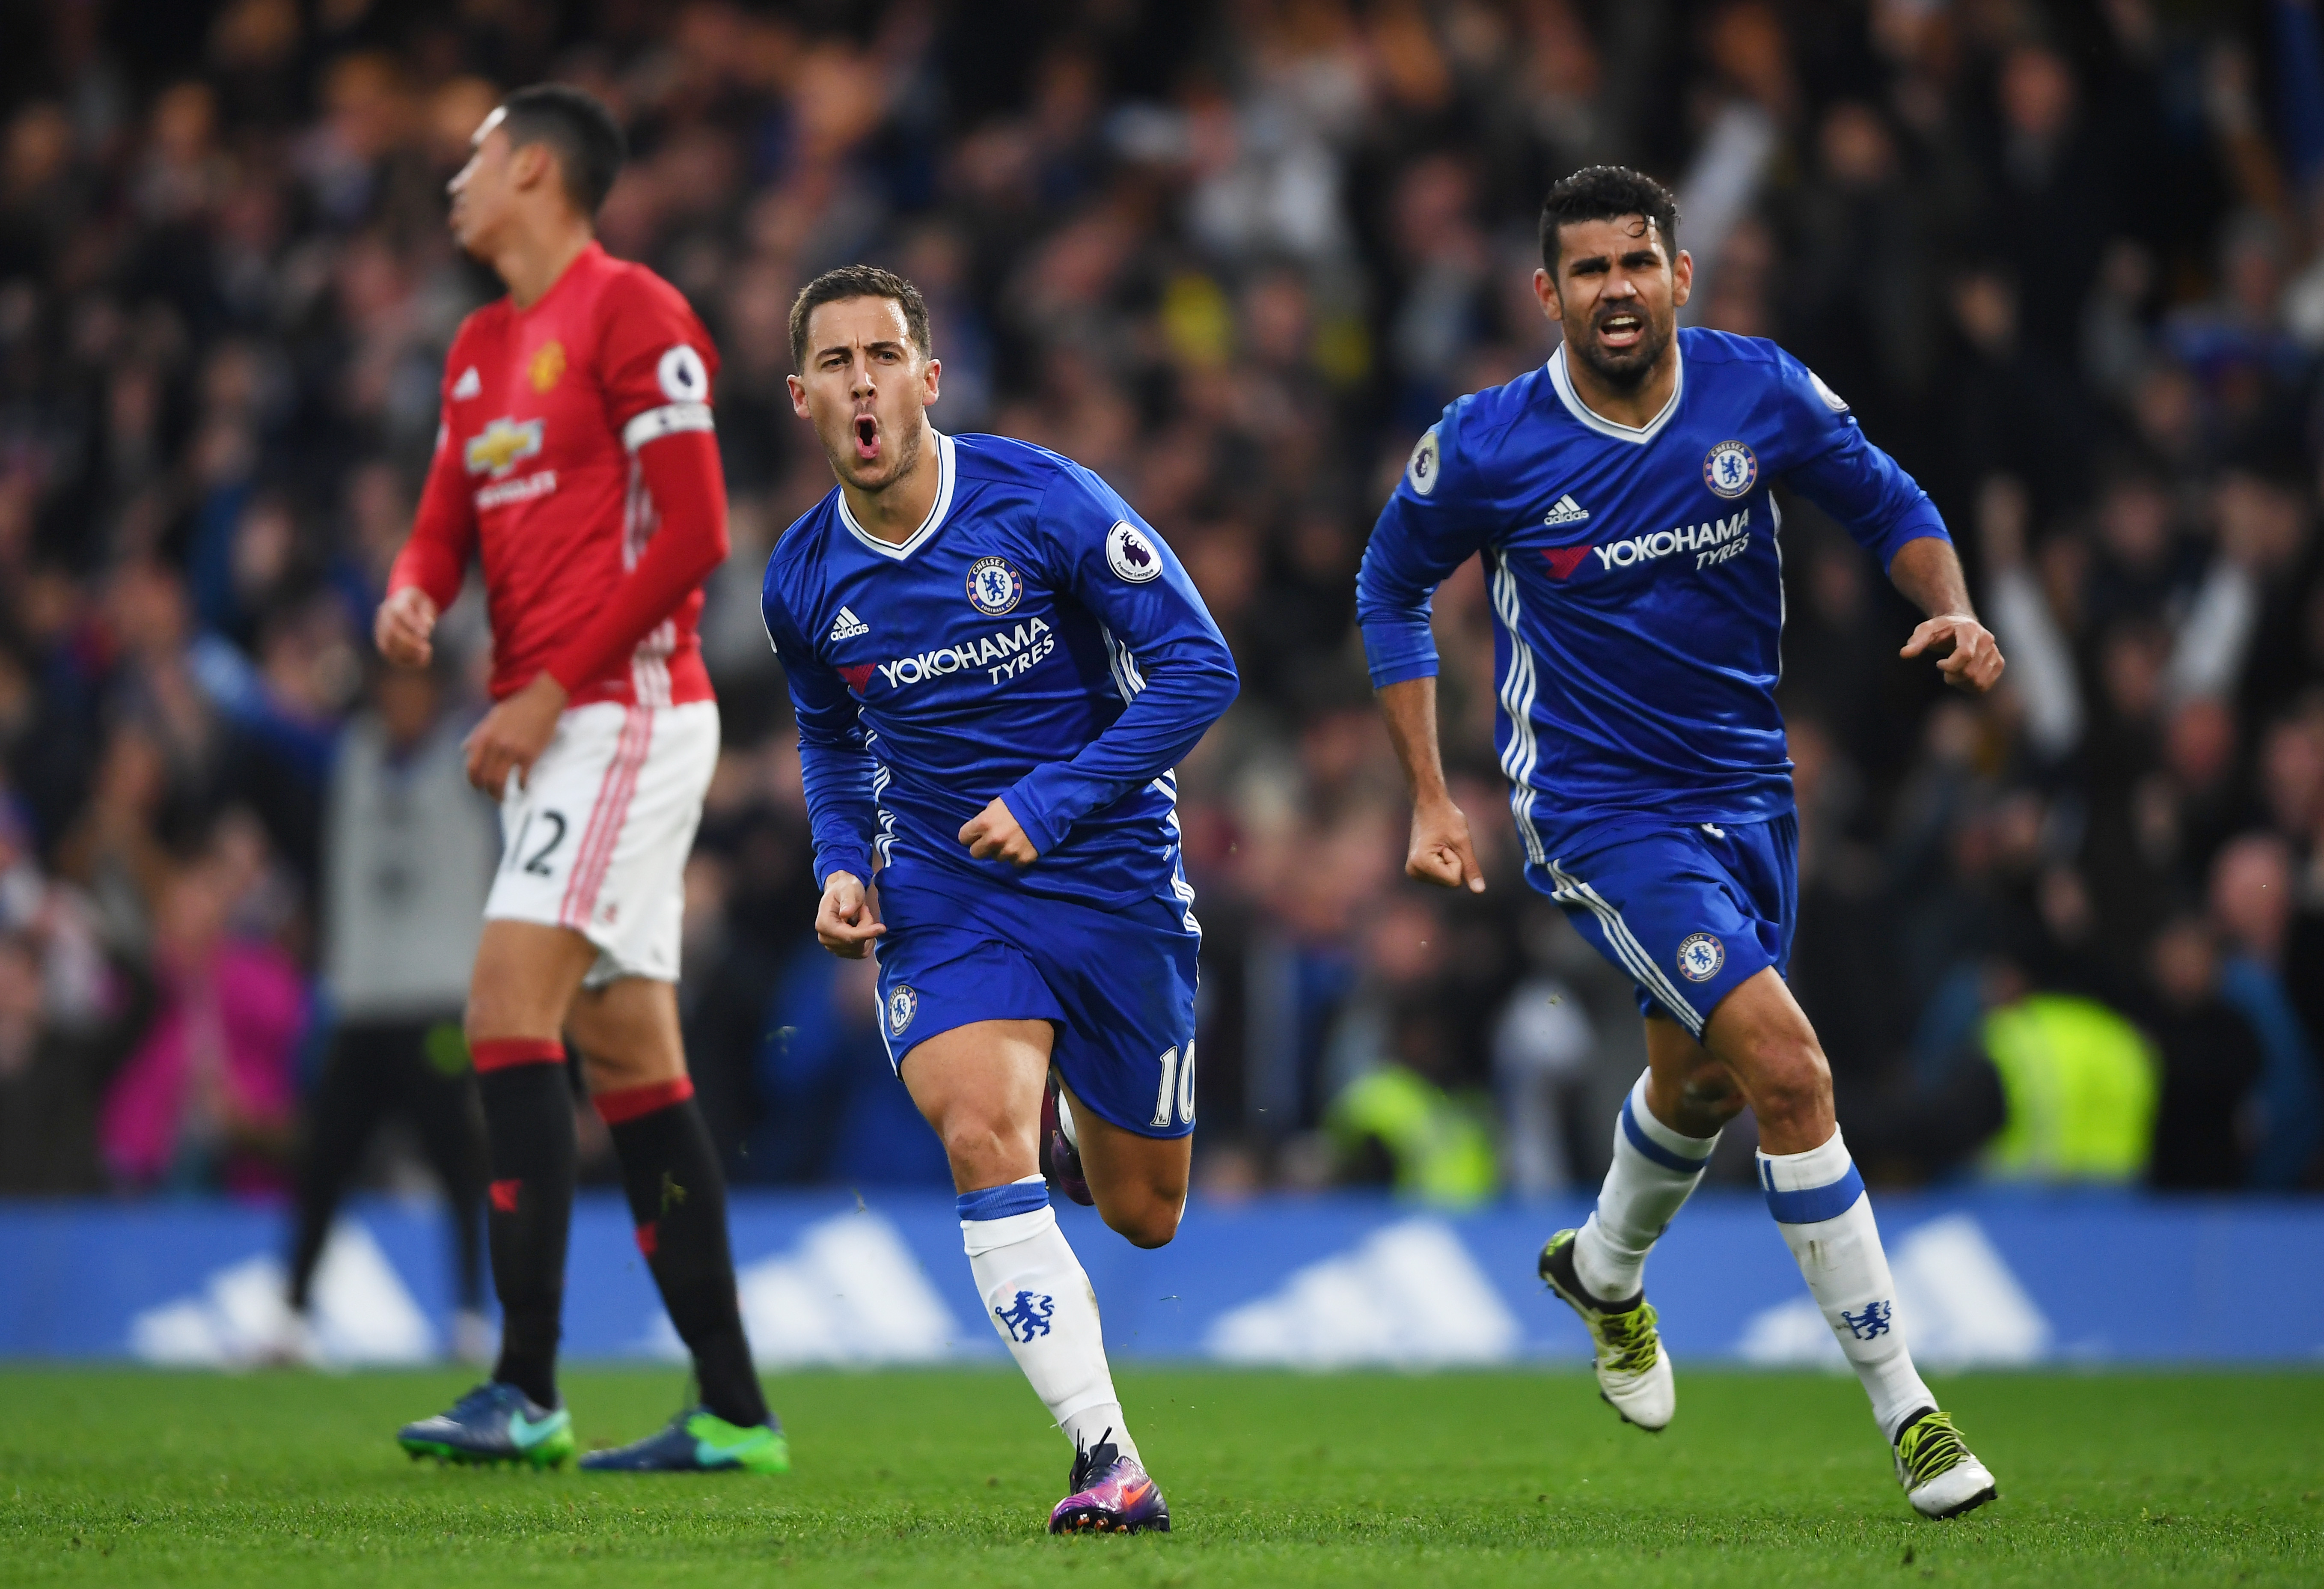 LONDON, ENGLAND - OCTOBER 23:  Eden Hazard of Chelsea celebrates scoring his sides third goal with Diego Costa of Chelsea during the Premier League match between Chelsea and Manchester United at Stamford Bridge on October 23, 2016 in London, England.  (Photo by Mike Hewitt/Getty Images)